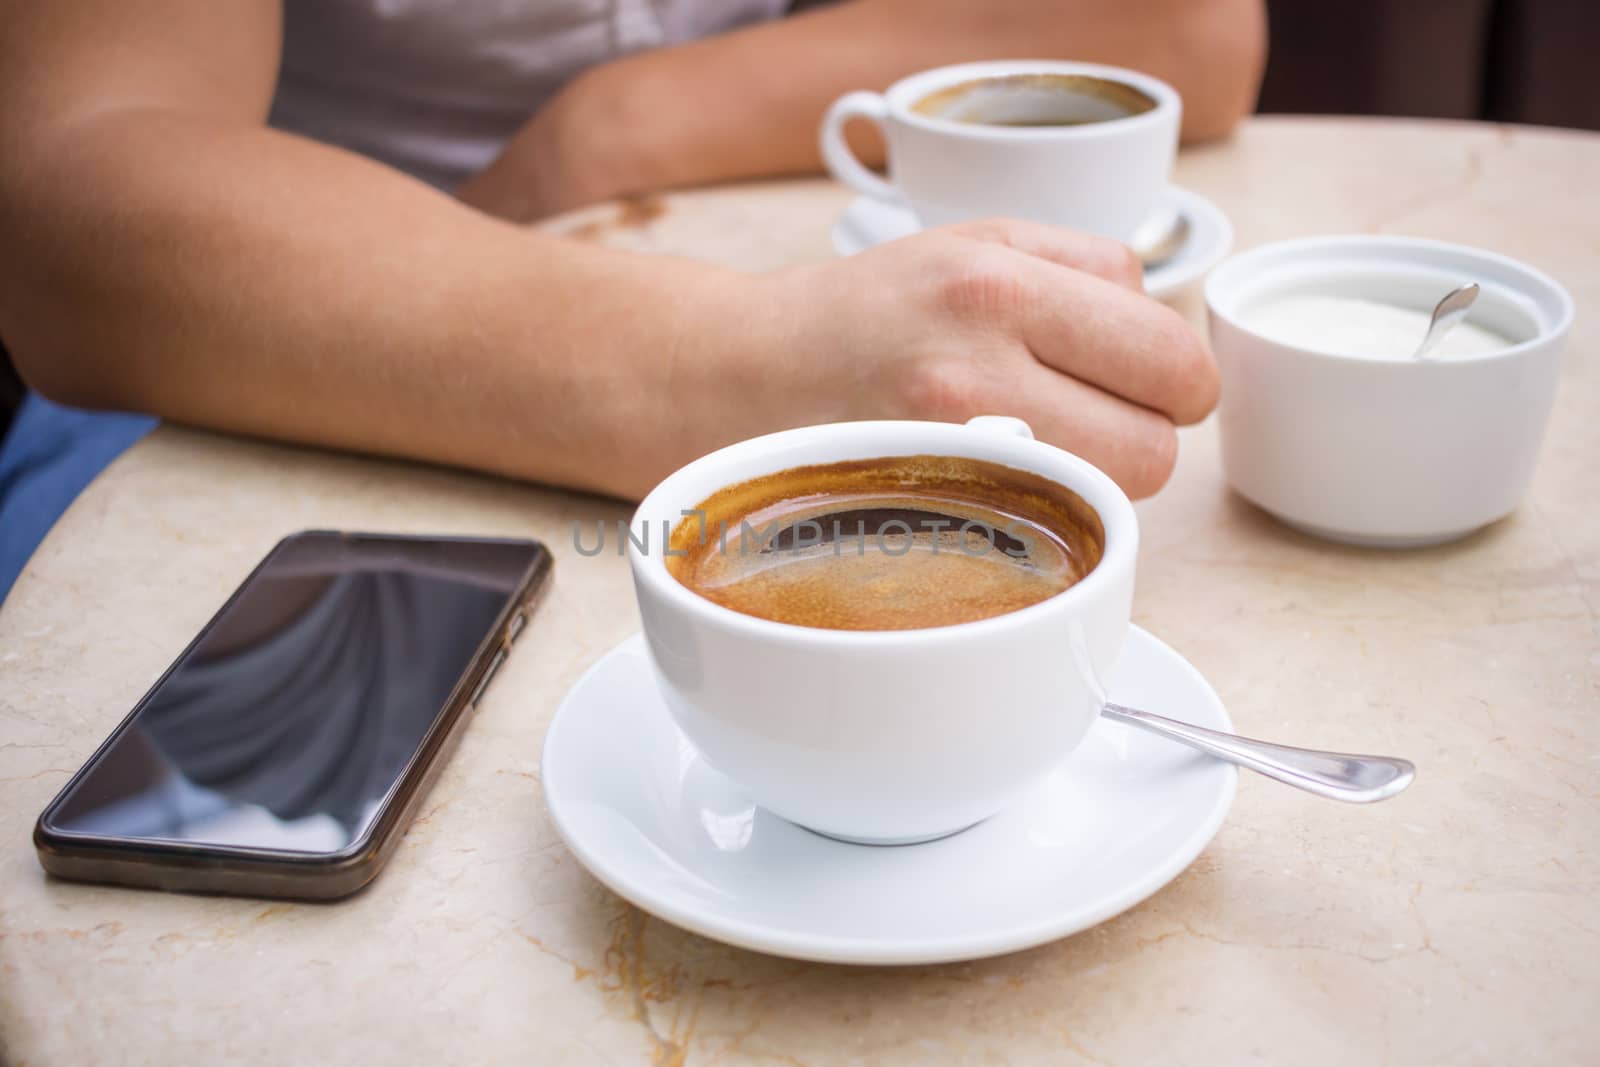 Man sits at marble table with smartphone and cup of coffee